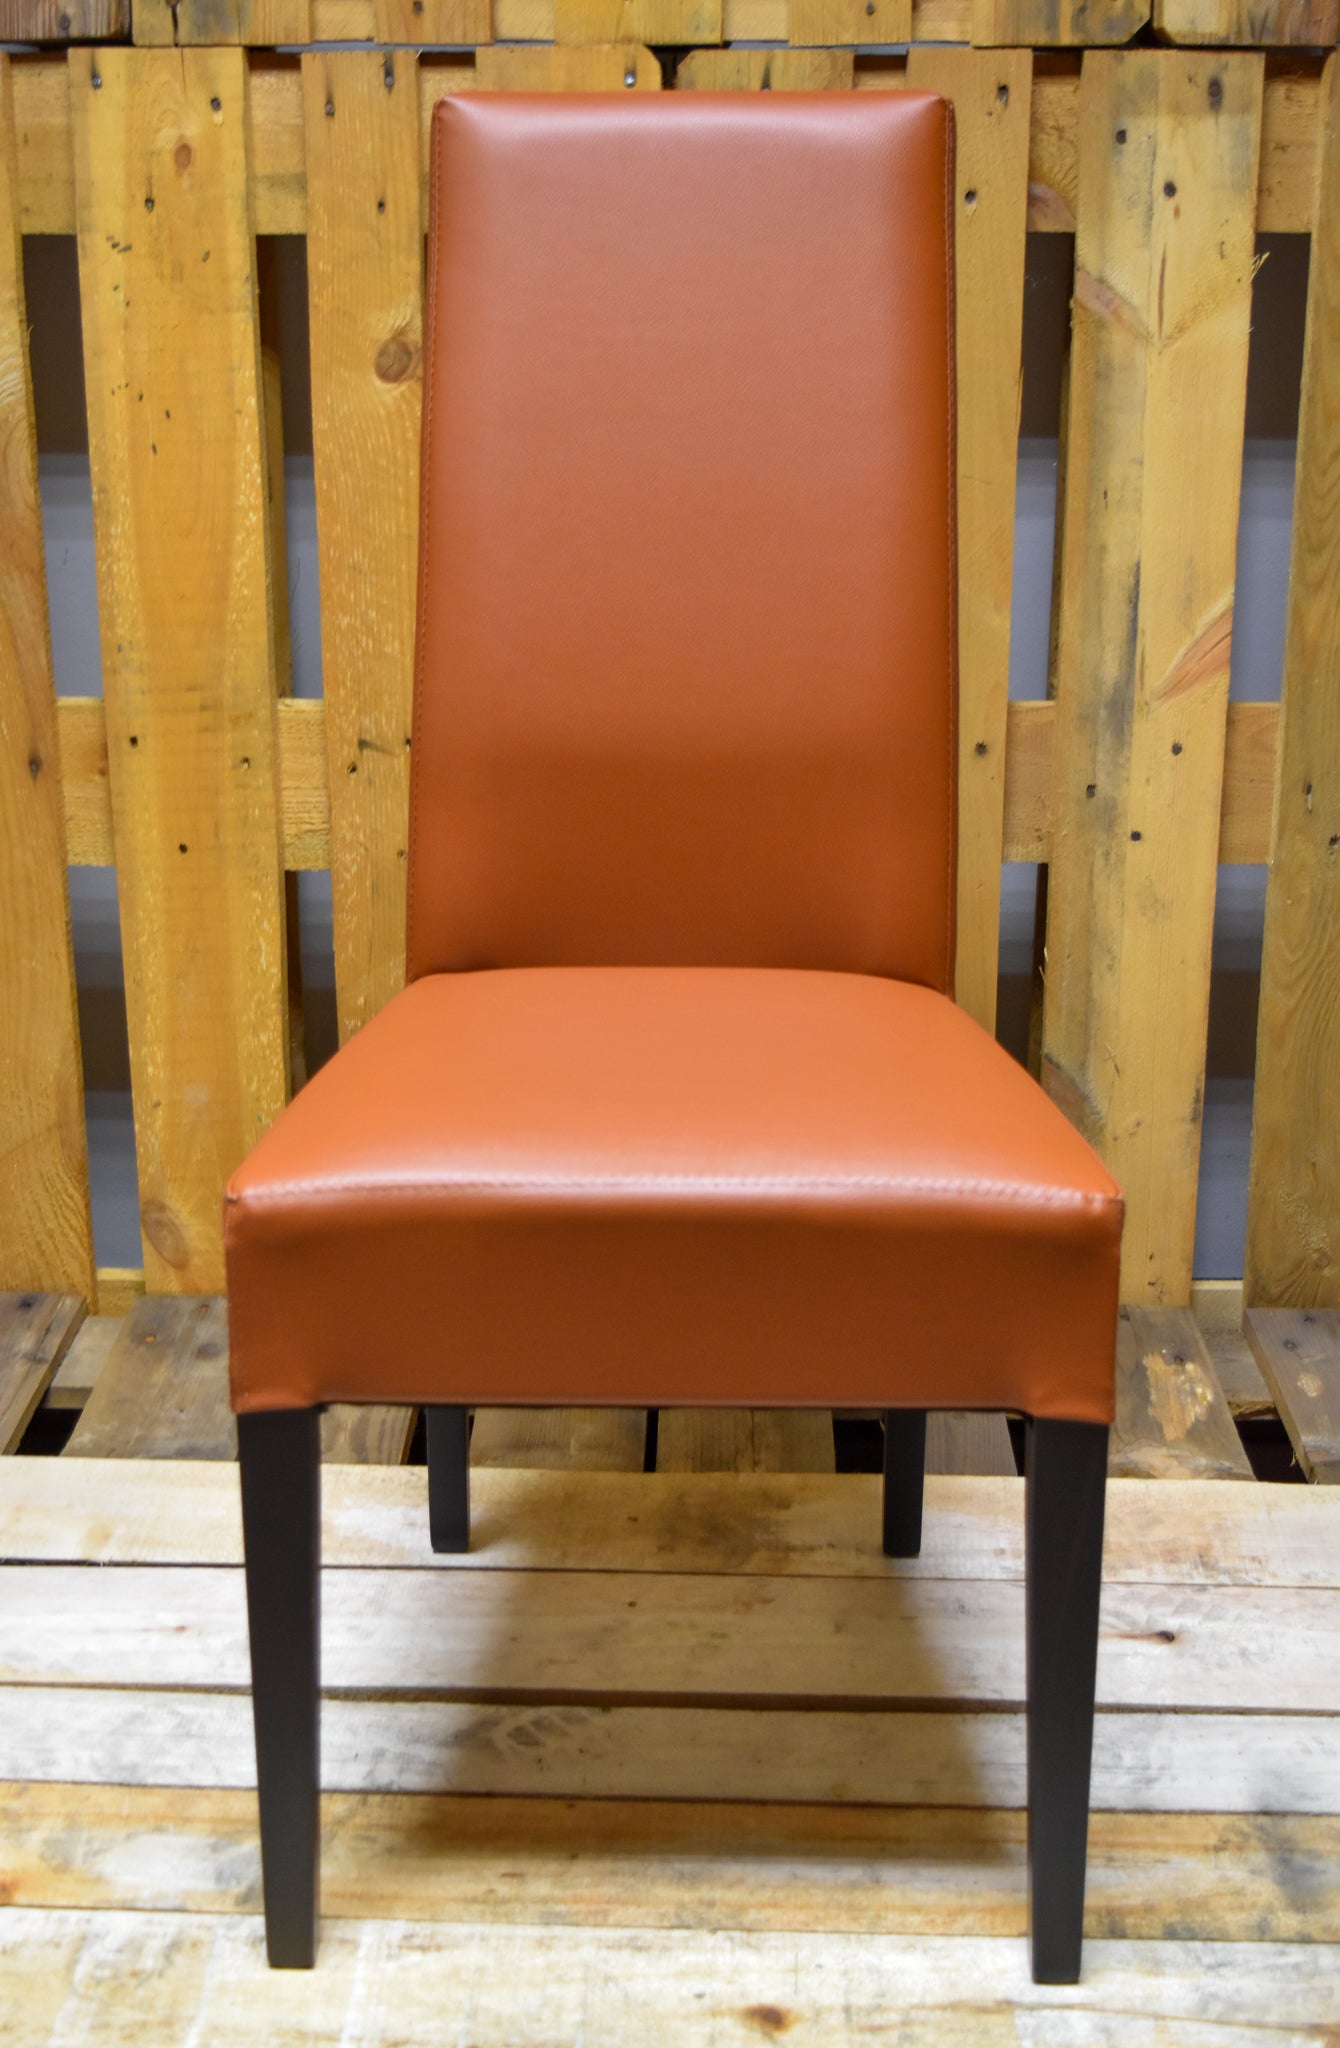 Stock chairs model 36 upholstered in imitation leather, tan color, wenge color legs